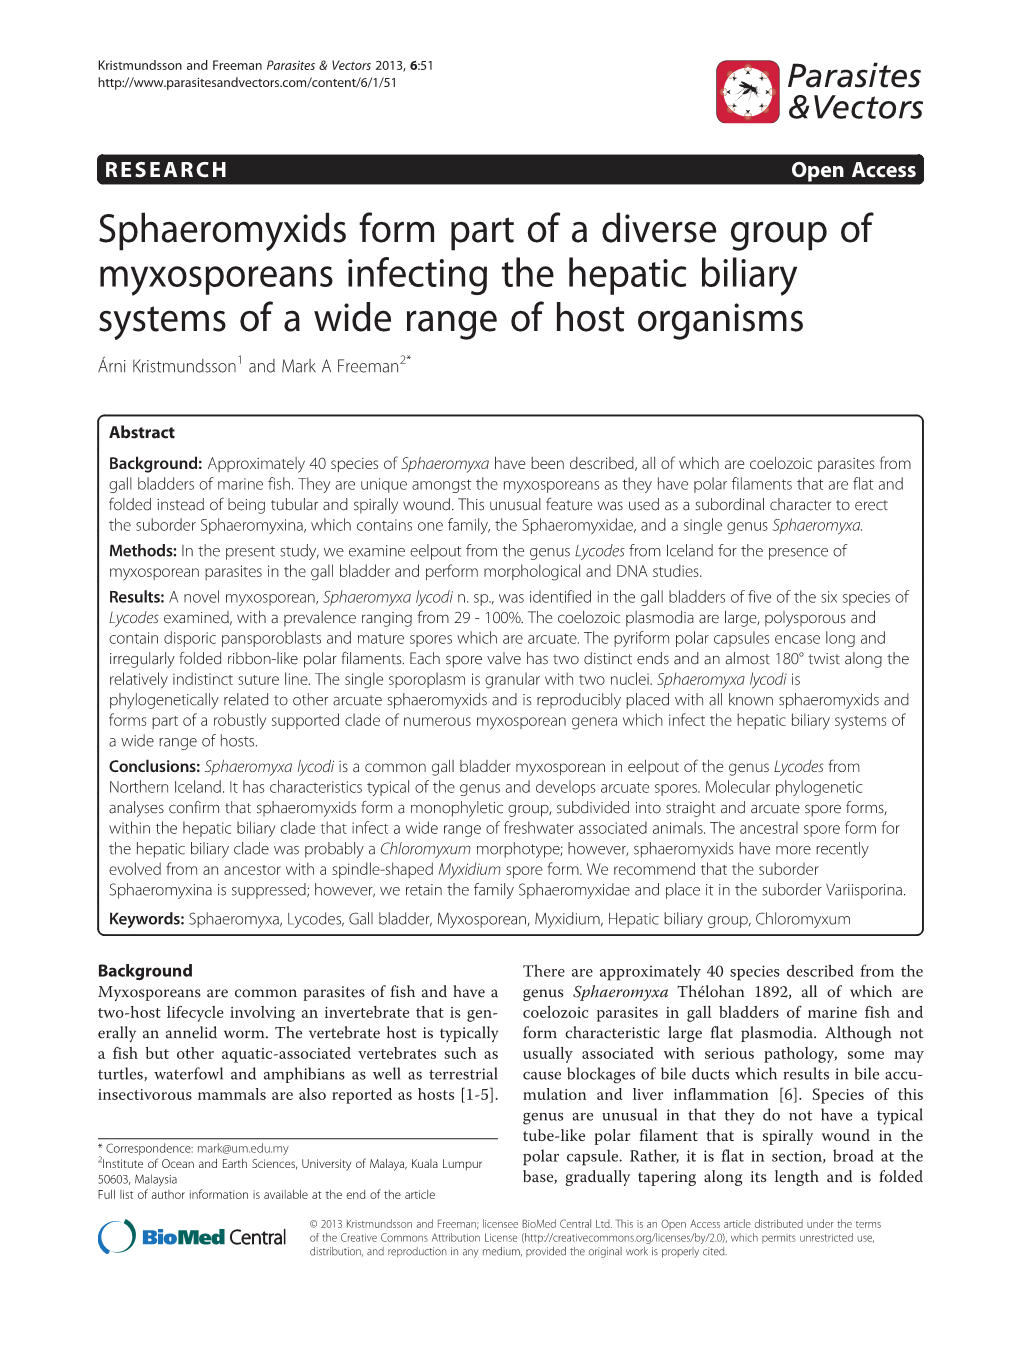 Sphaeromyxids Form Part of a Diverse Group of Myxosporeans Infecting